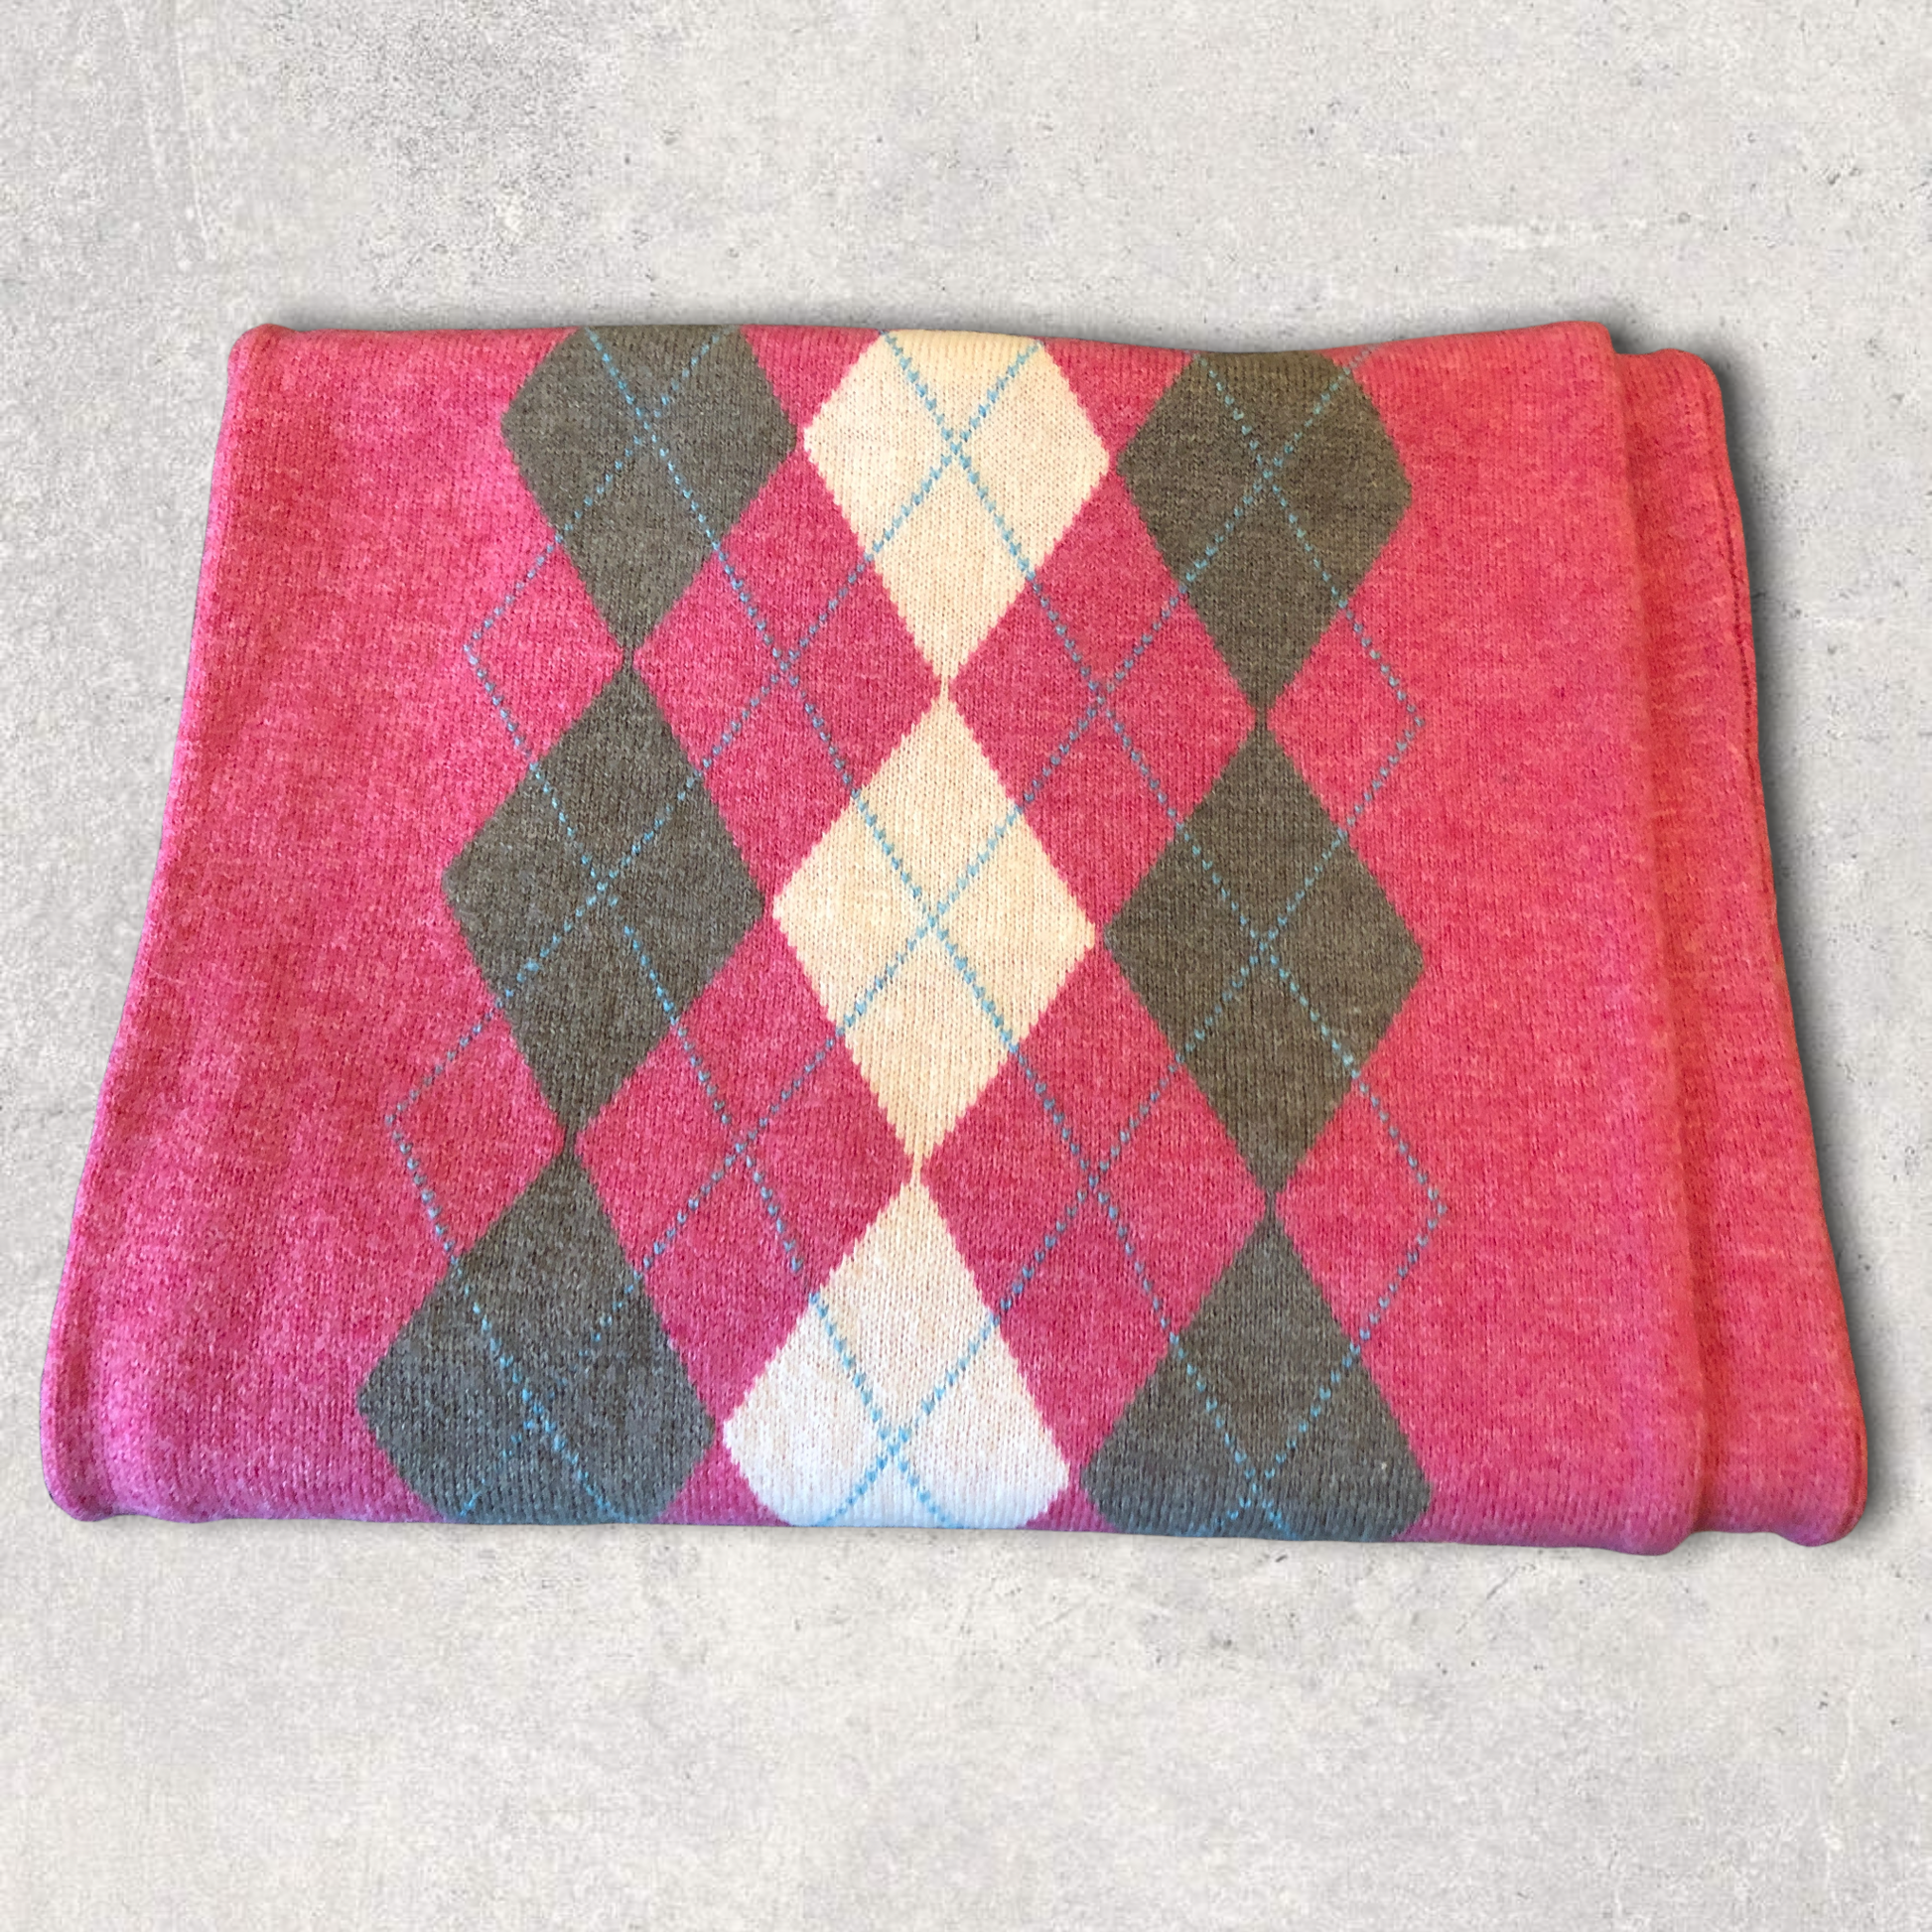 Crew Clothing Co Men's Pink Argyle Lambswool Scarf Timeless Fashions